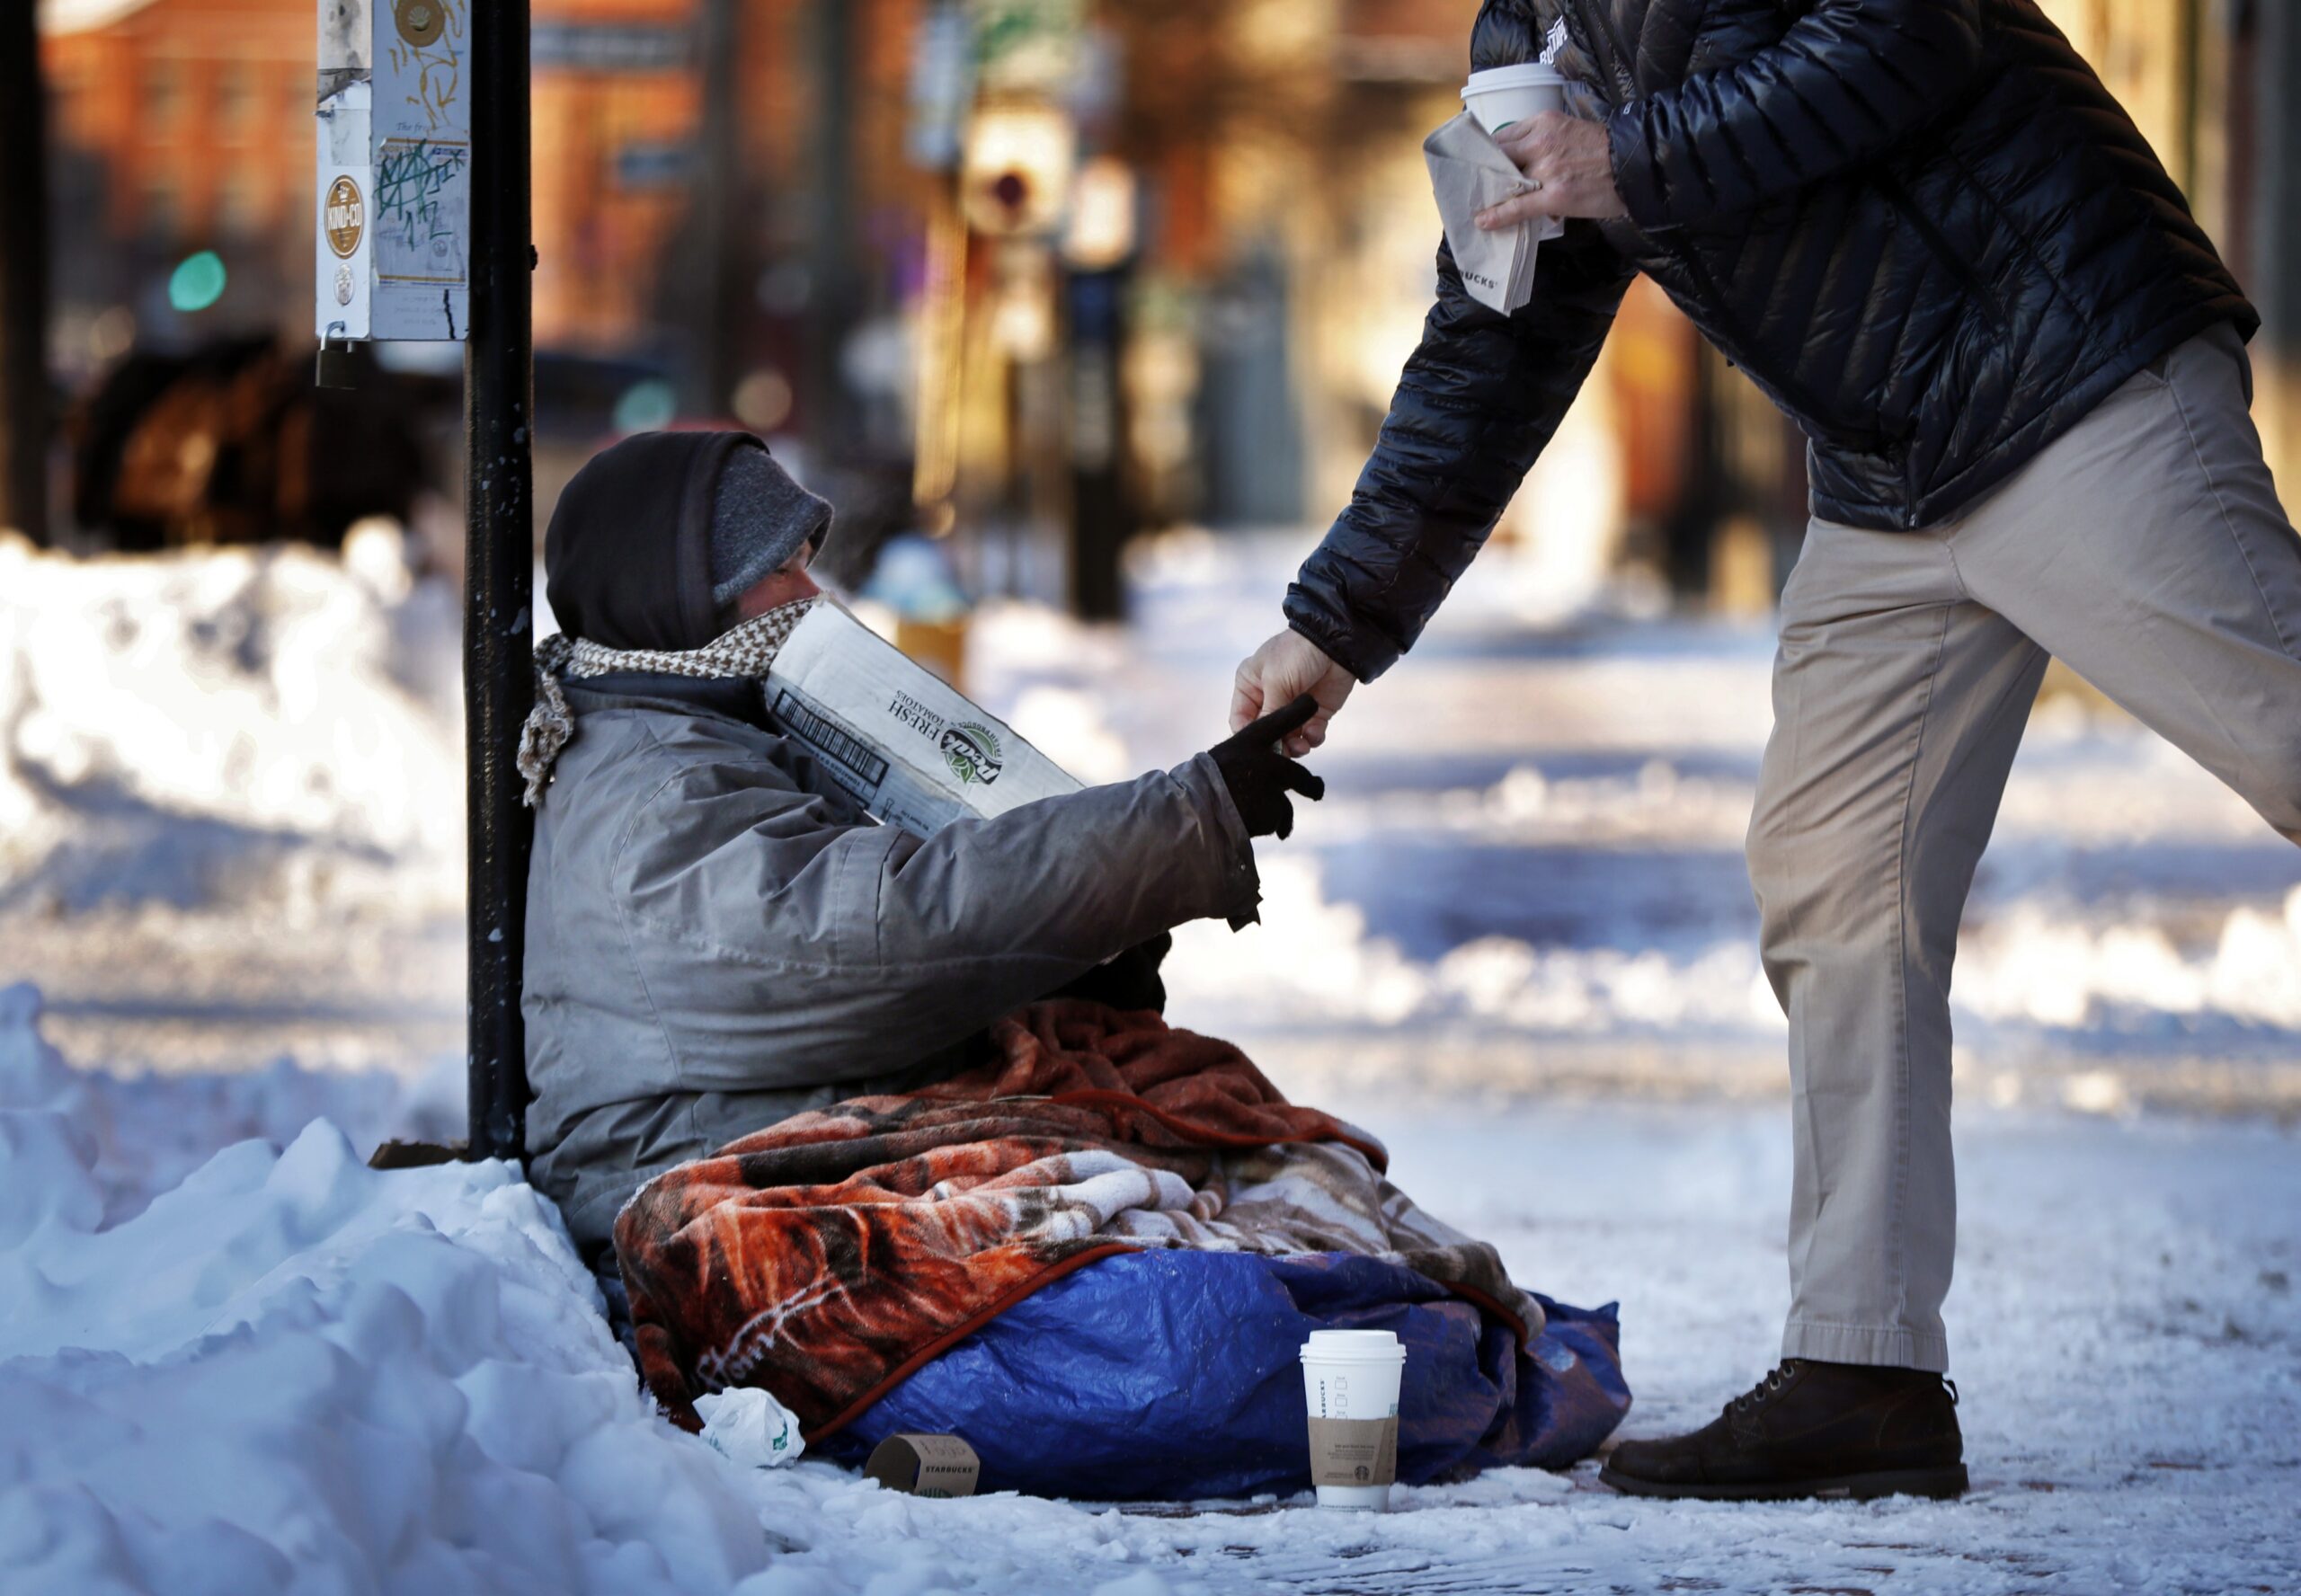 Milwaukee’s warming shelters see near-capacity numbers amid frigid temperatures